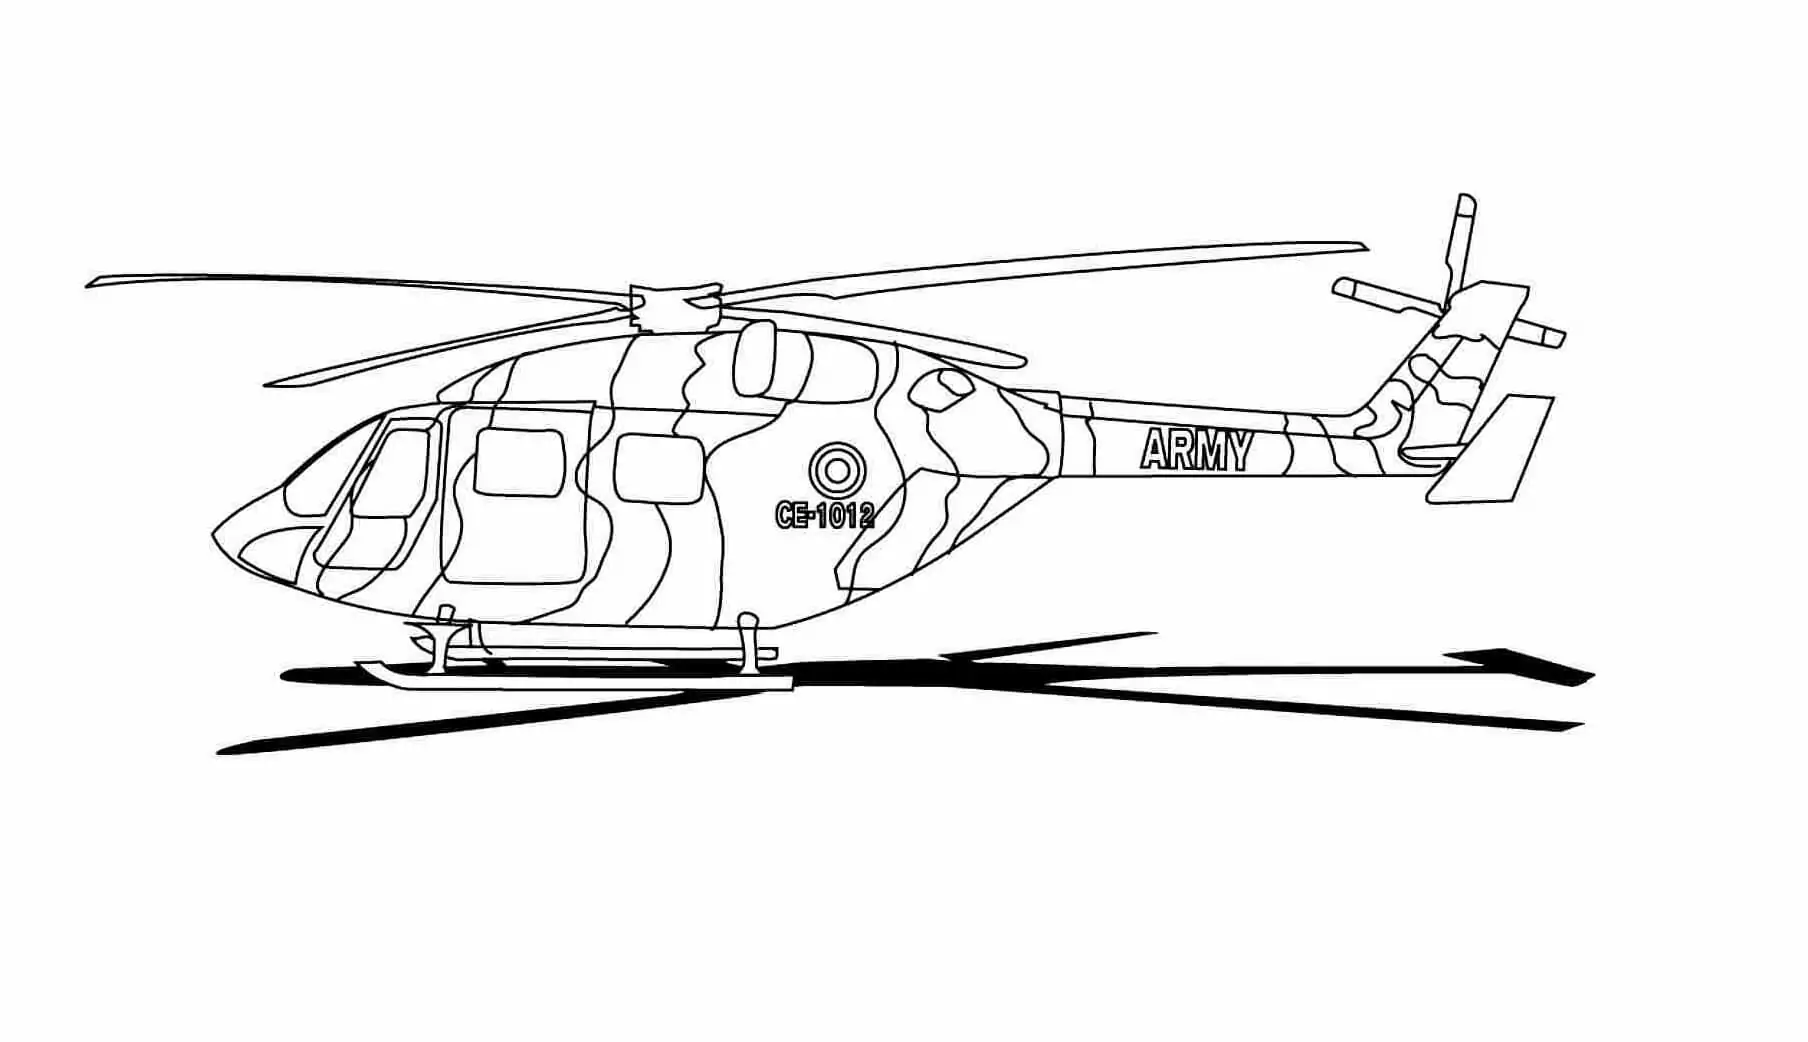 Army Helicopter CE 1012